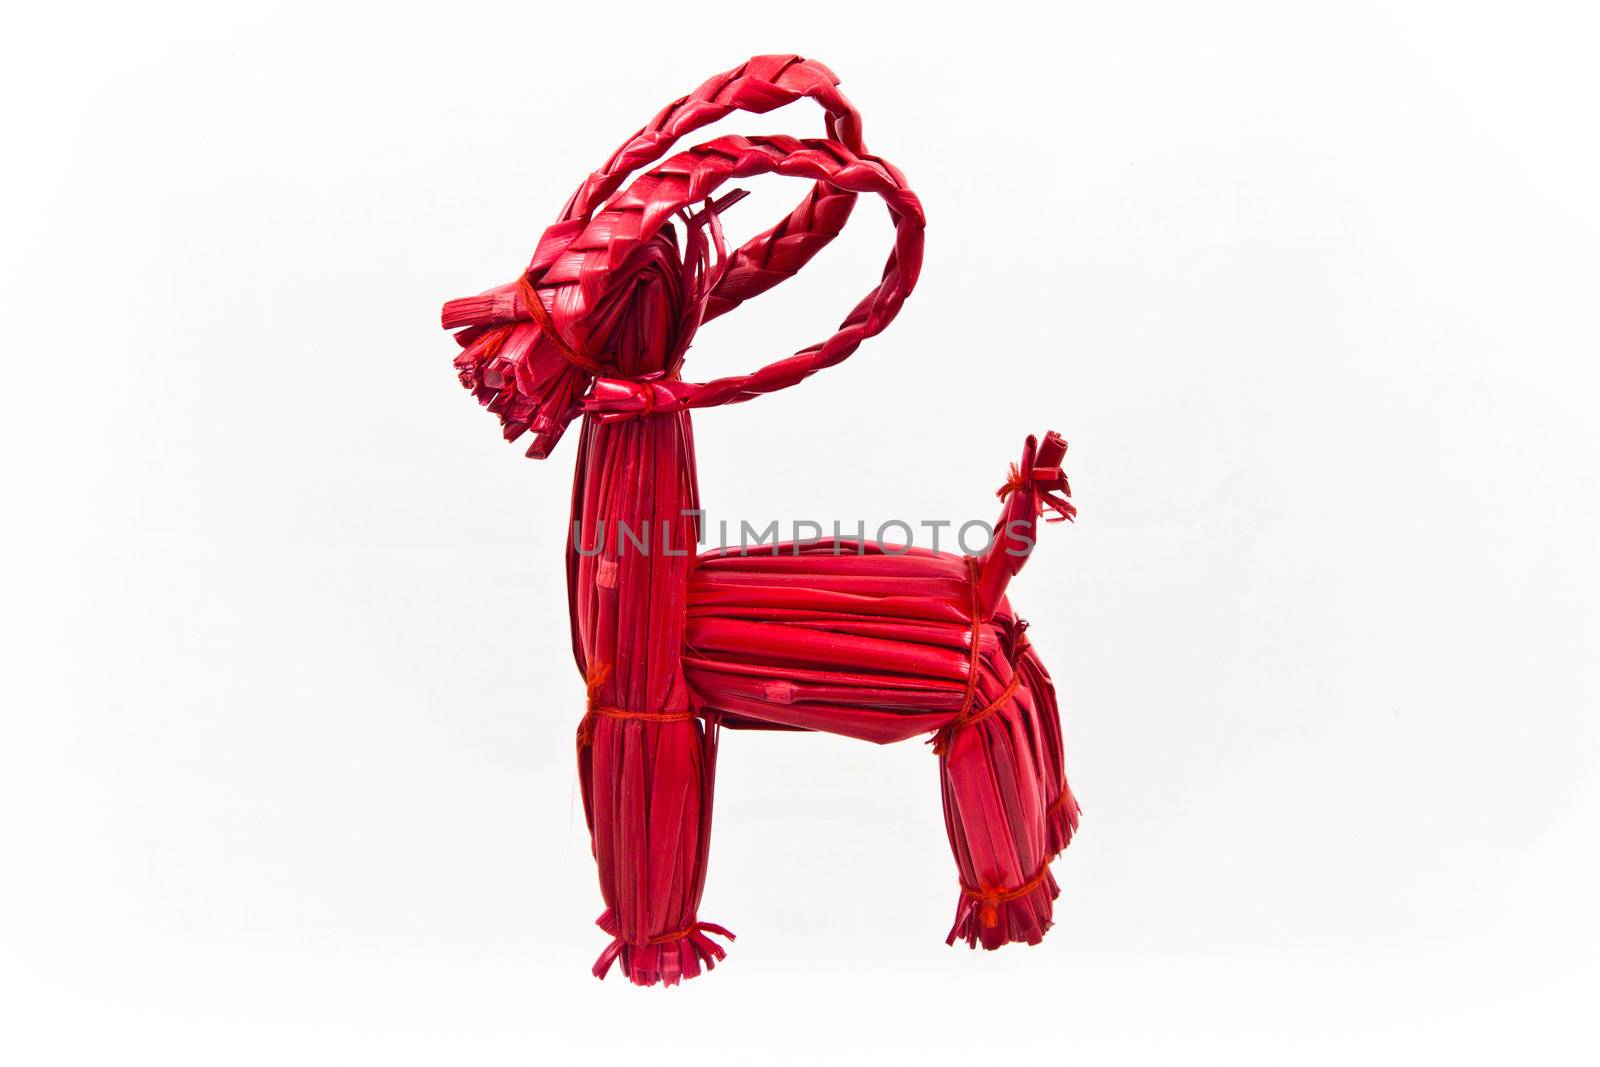 The Christmas goat is one of the oldest Scandinavian symbols and traditions by huntz